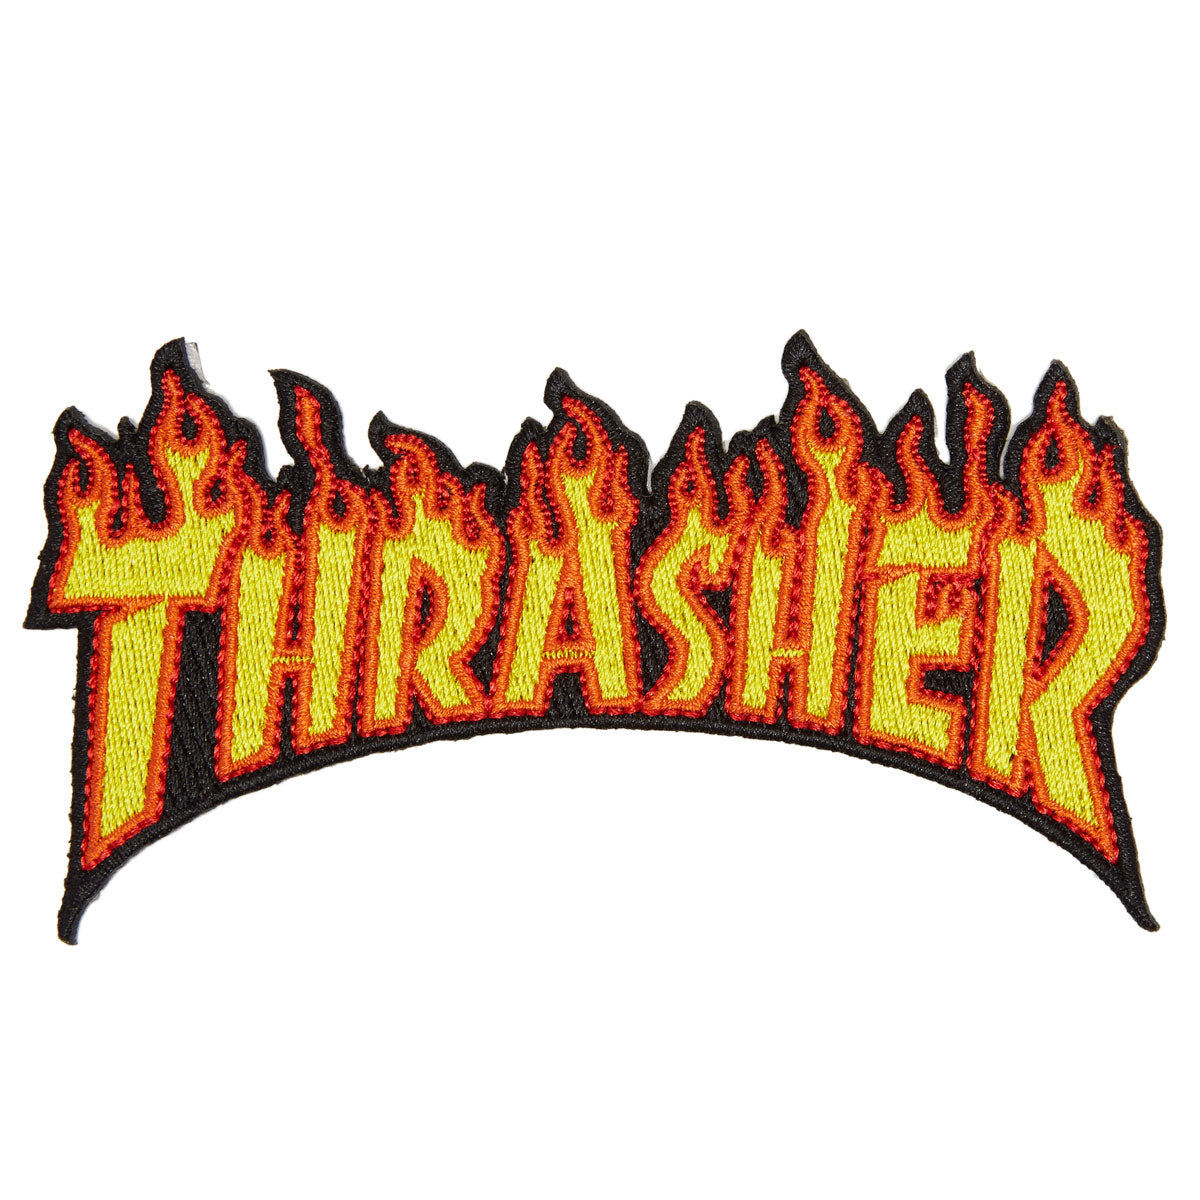 Thrasher Flame Patch image 1